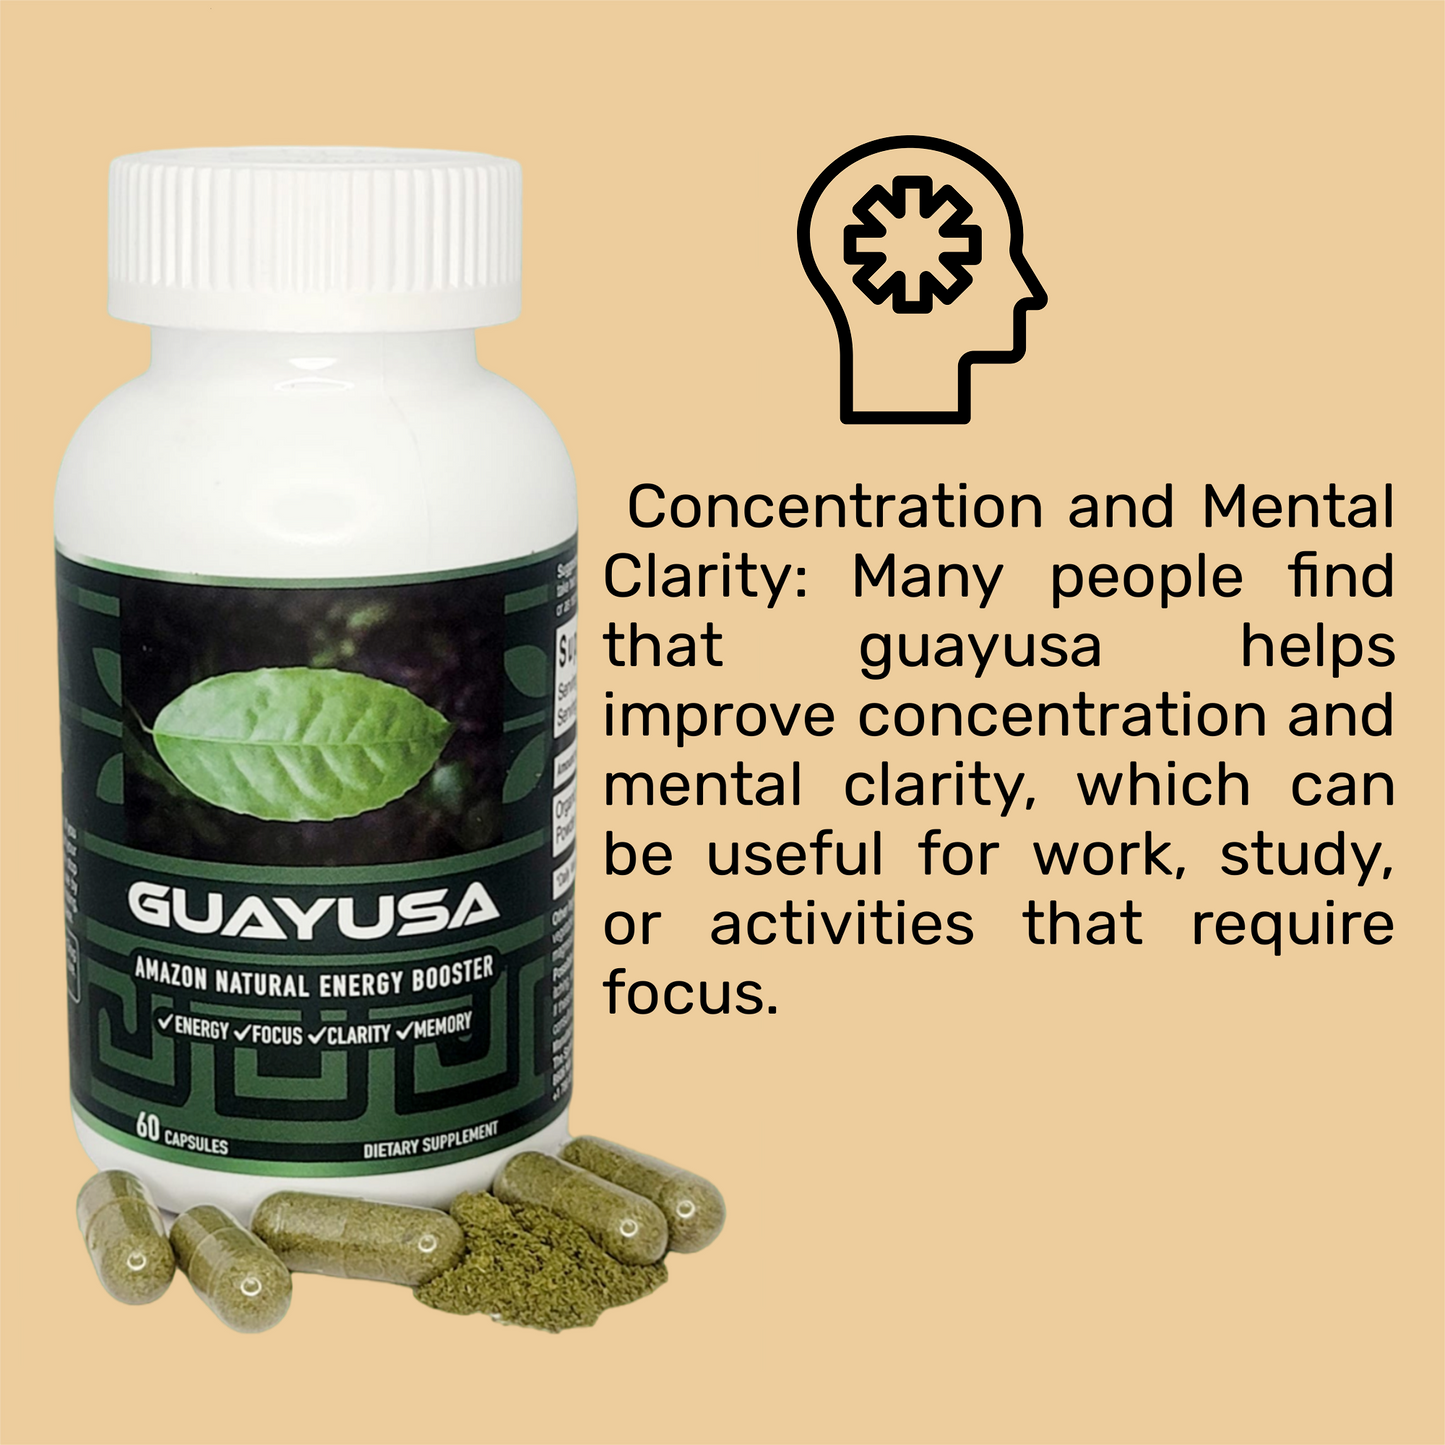 Guayusa Capsules PURE Product No Extract - Organic, Vegan, Loose Leaf Powder Capsule for Natural Energy Boost, Focus, Memory Improvement, and Stress Relief - High in Antioxidants, Caffeine Alternative